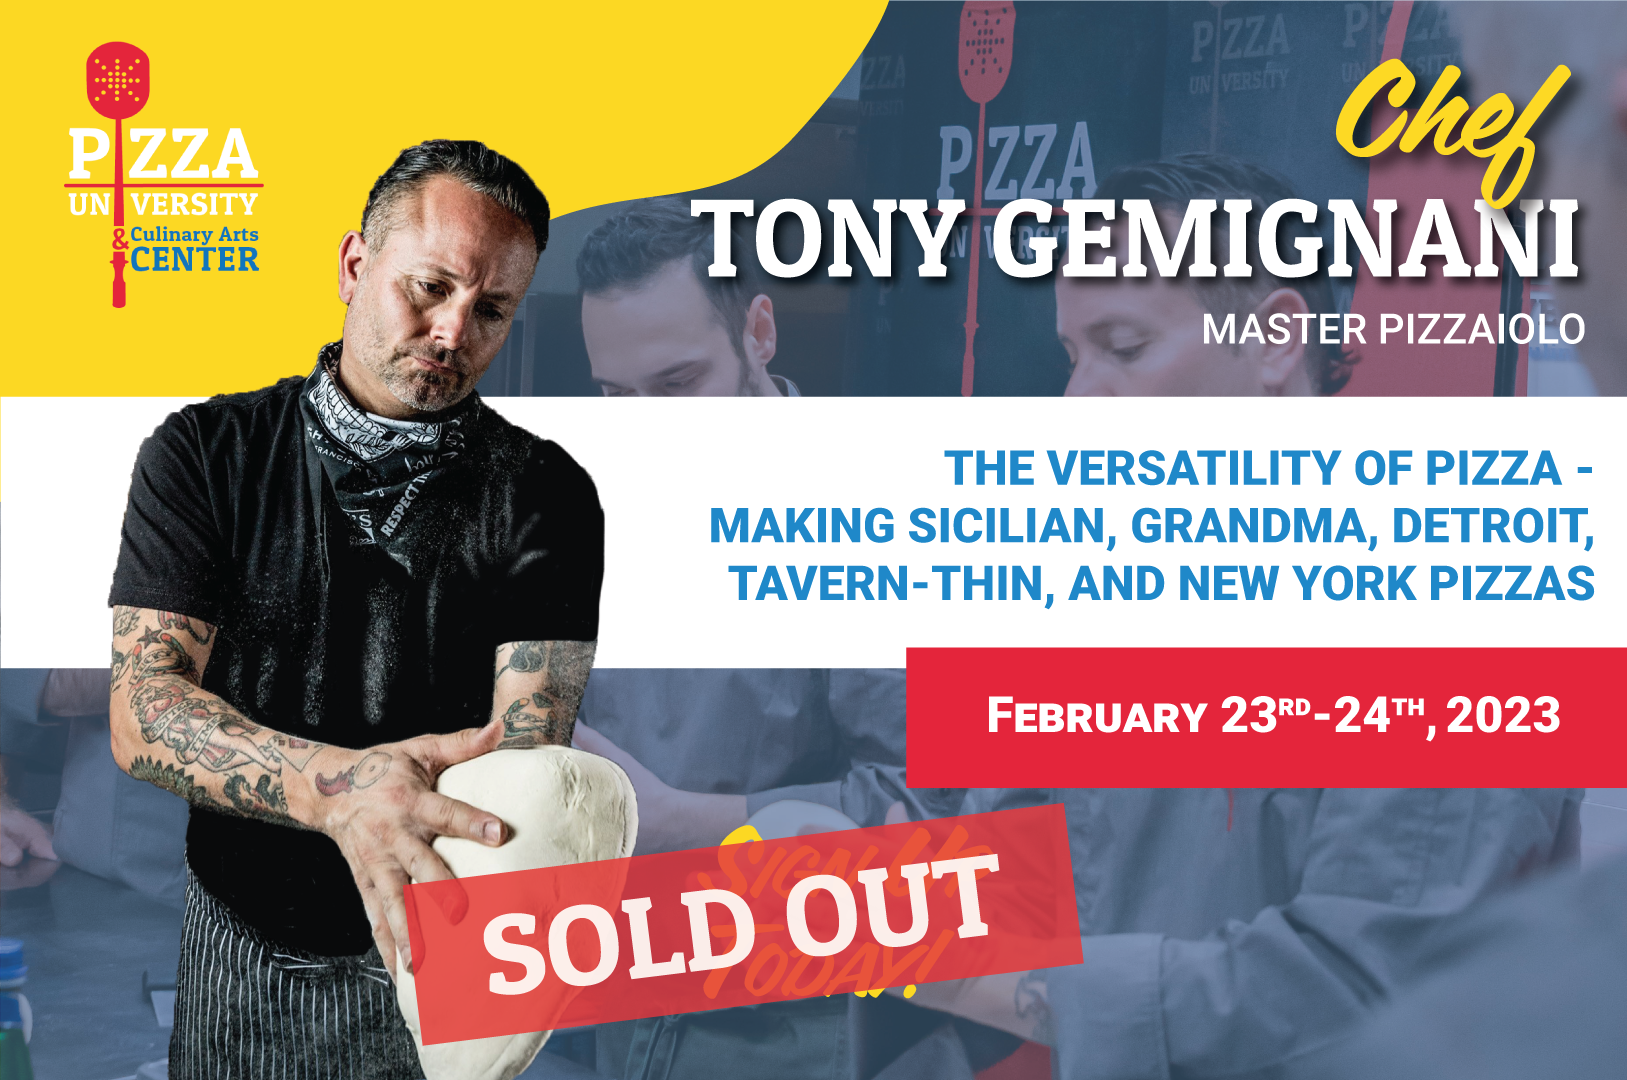 2-Day Intensive “The Versatility of Pizza” Class with Tony Gemignani